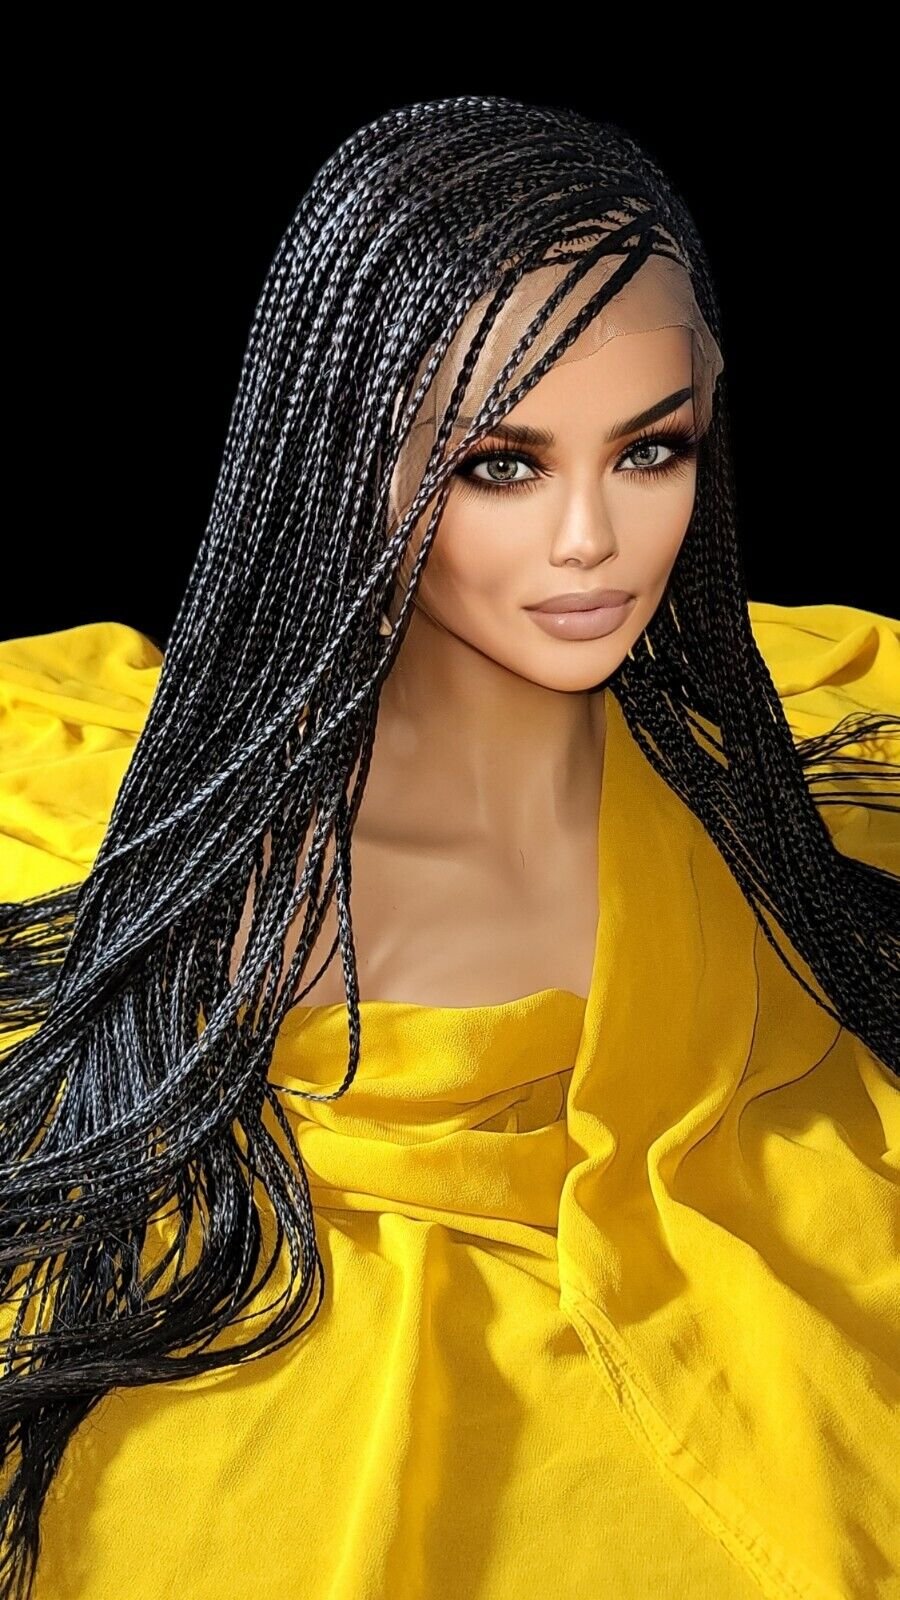 Braided wig: Premium 24 Knotless Braid Wig with Full Lace and